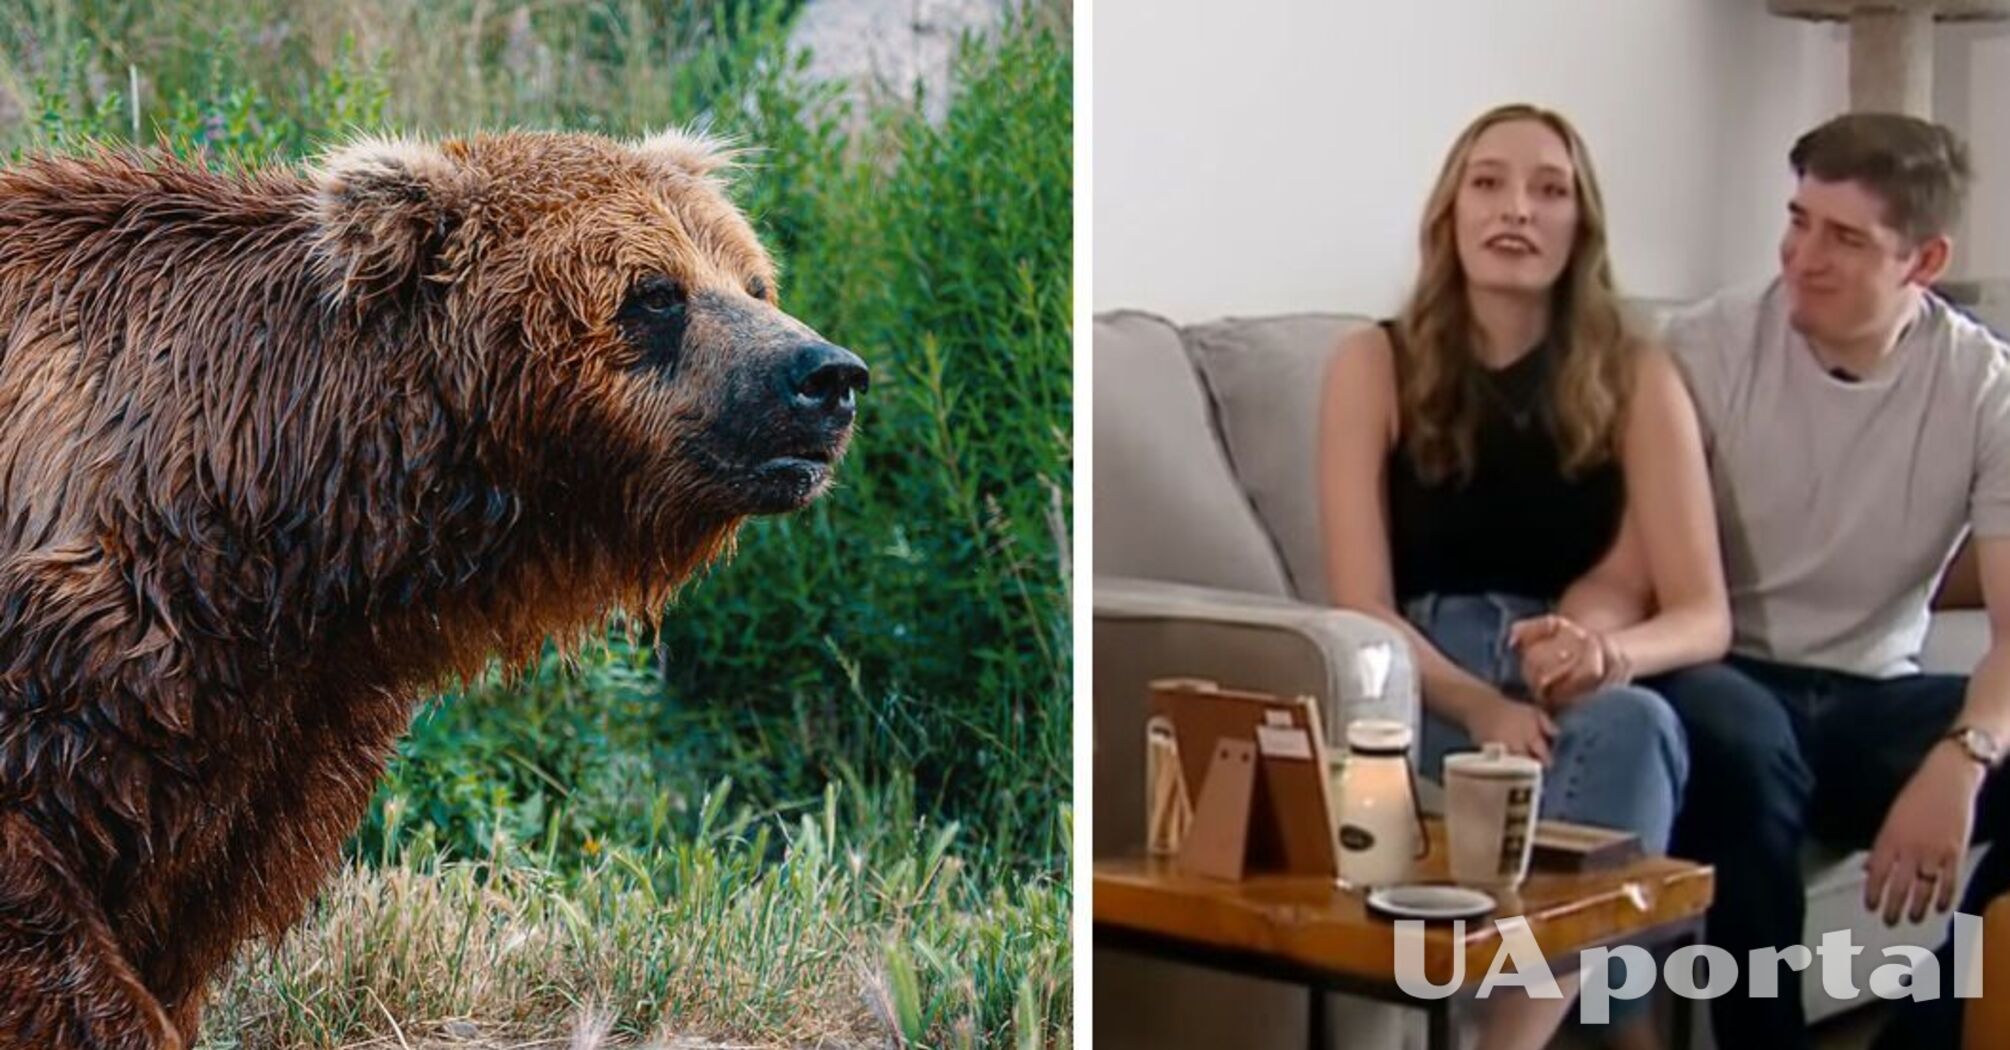 Bear in the US disrupts a wedding when it breaks in for dessert (video)